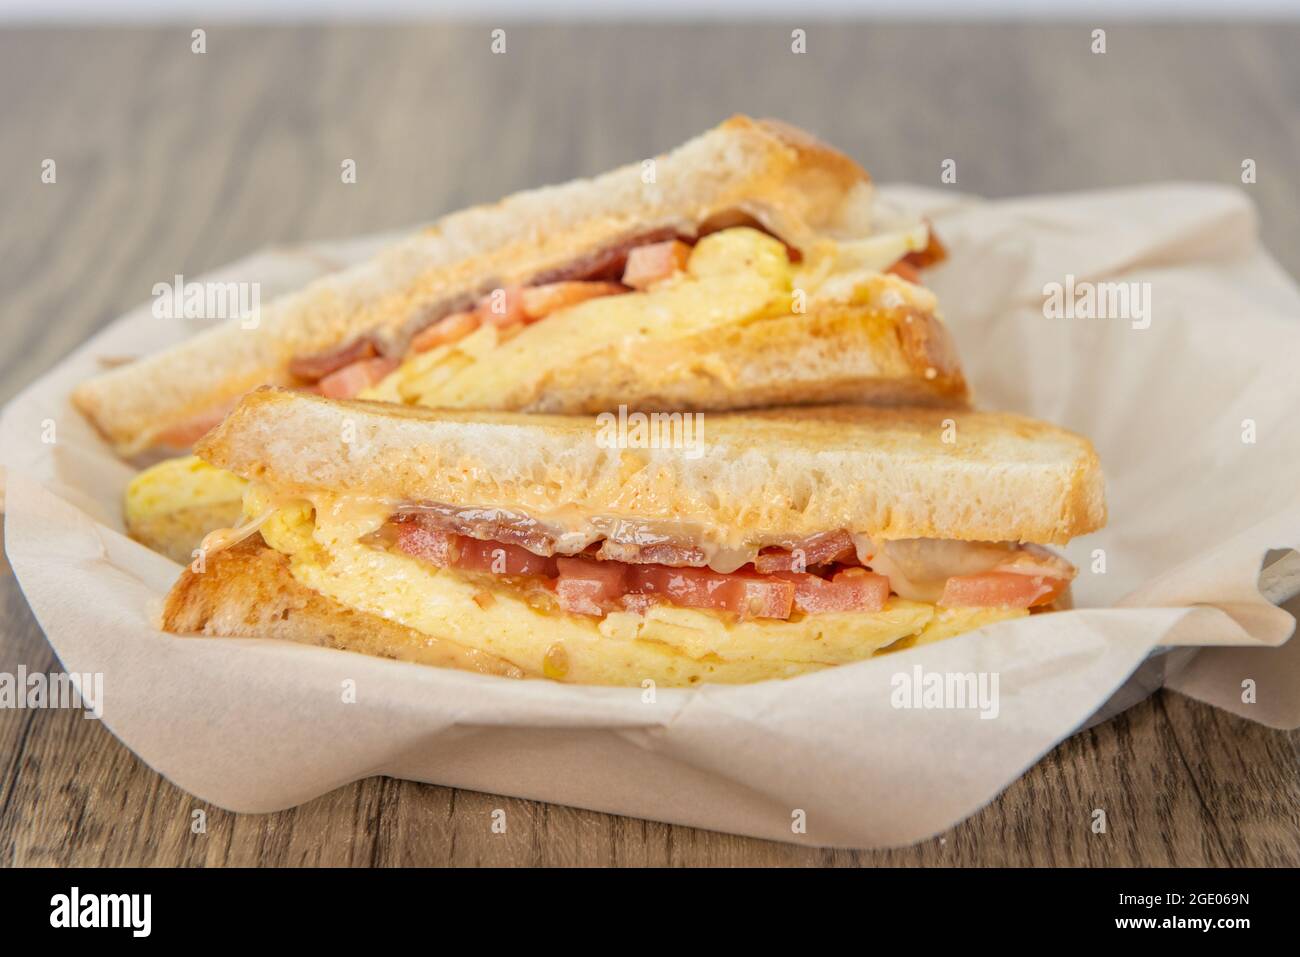 Breakfast ham and cheese sandwich loaded with all the good fixings to completely fill any appetite for a meal. Stock Photo